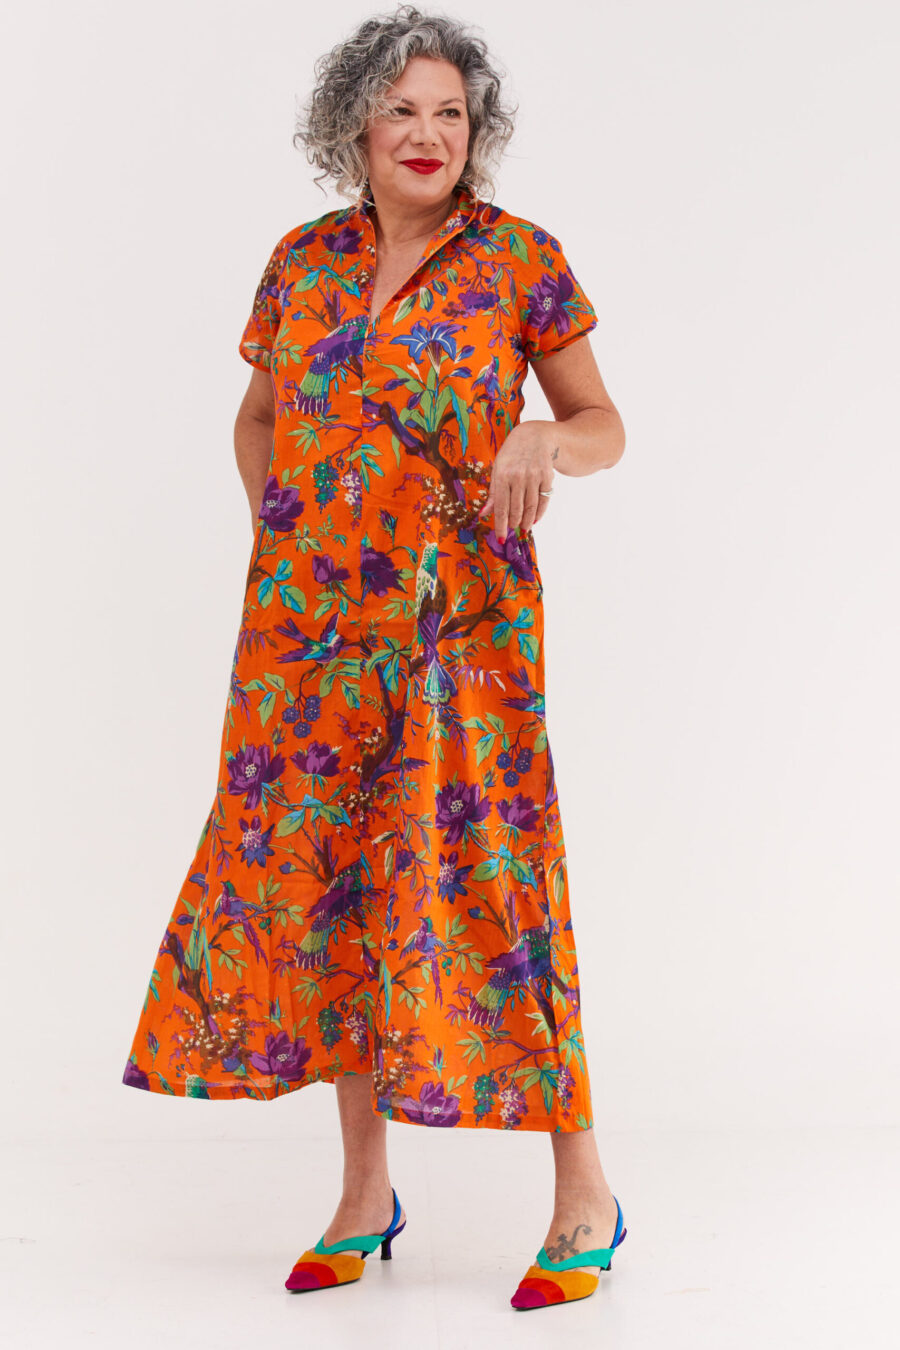 Maiko dress | Japanese dress with a unique high collar – Orange tropicana, colorful tropical print on an orange backgroung by comfort zone boutique